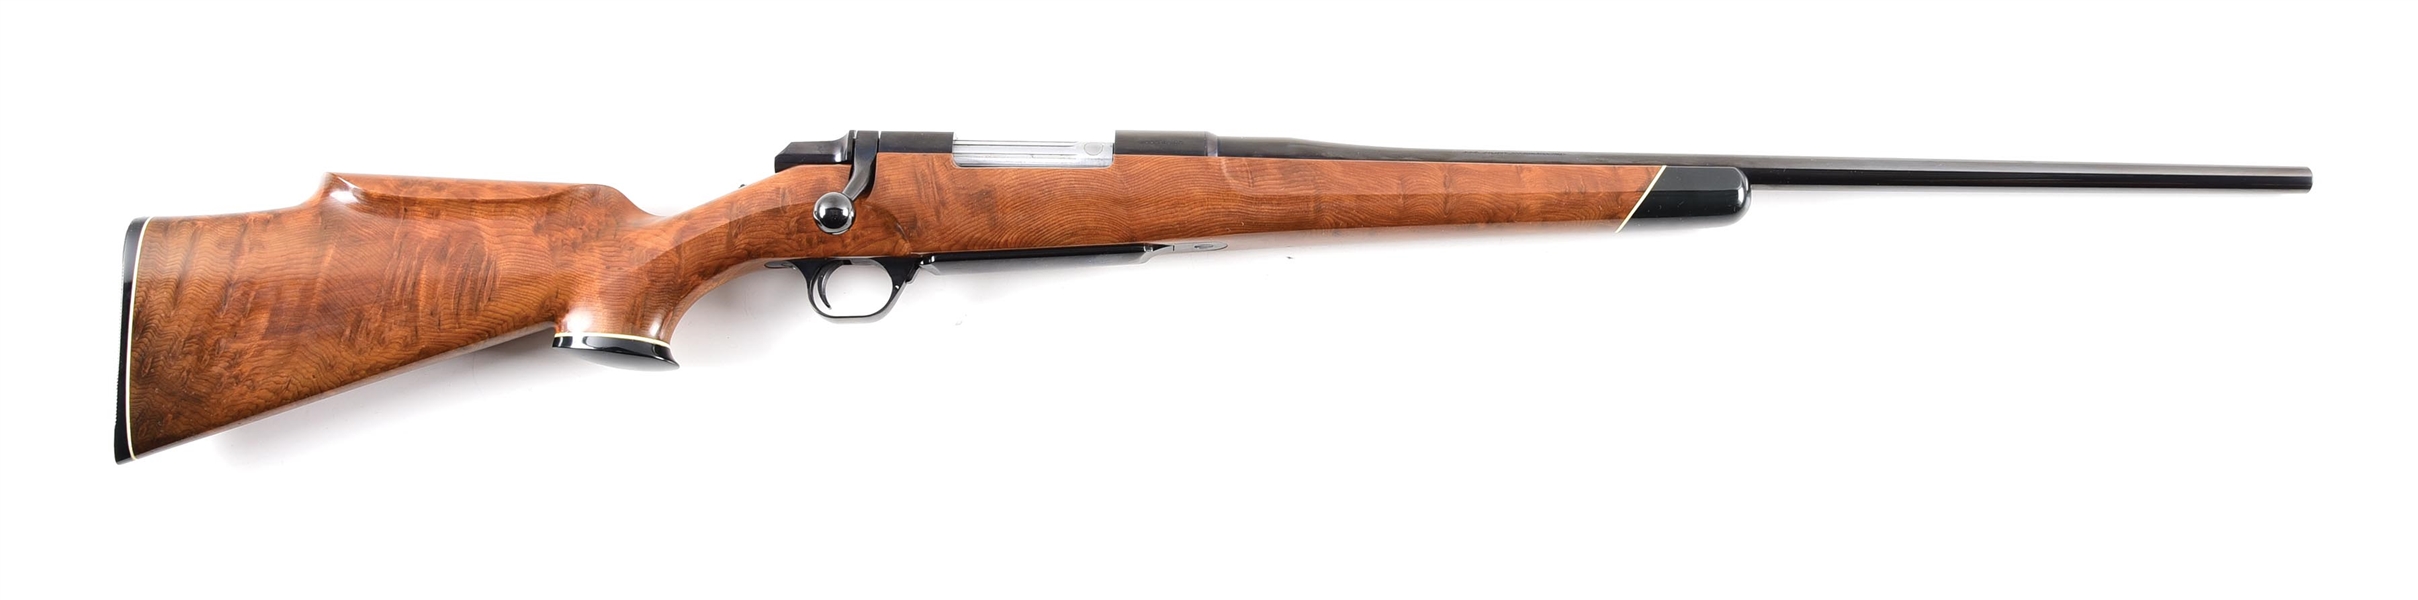 (M) BROWNING BBR BOLT ACTION RIFLE WITH REDWOOD RADICAL CUT STOCK.